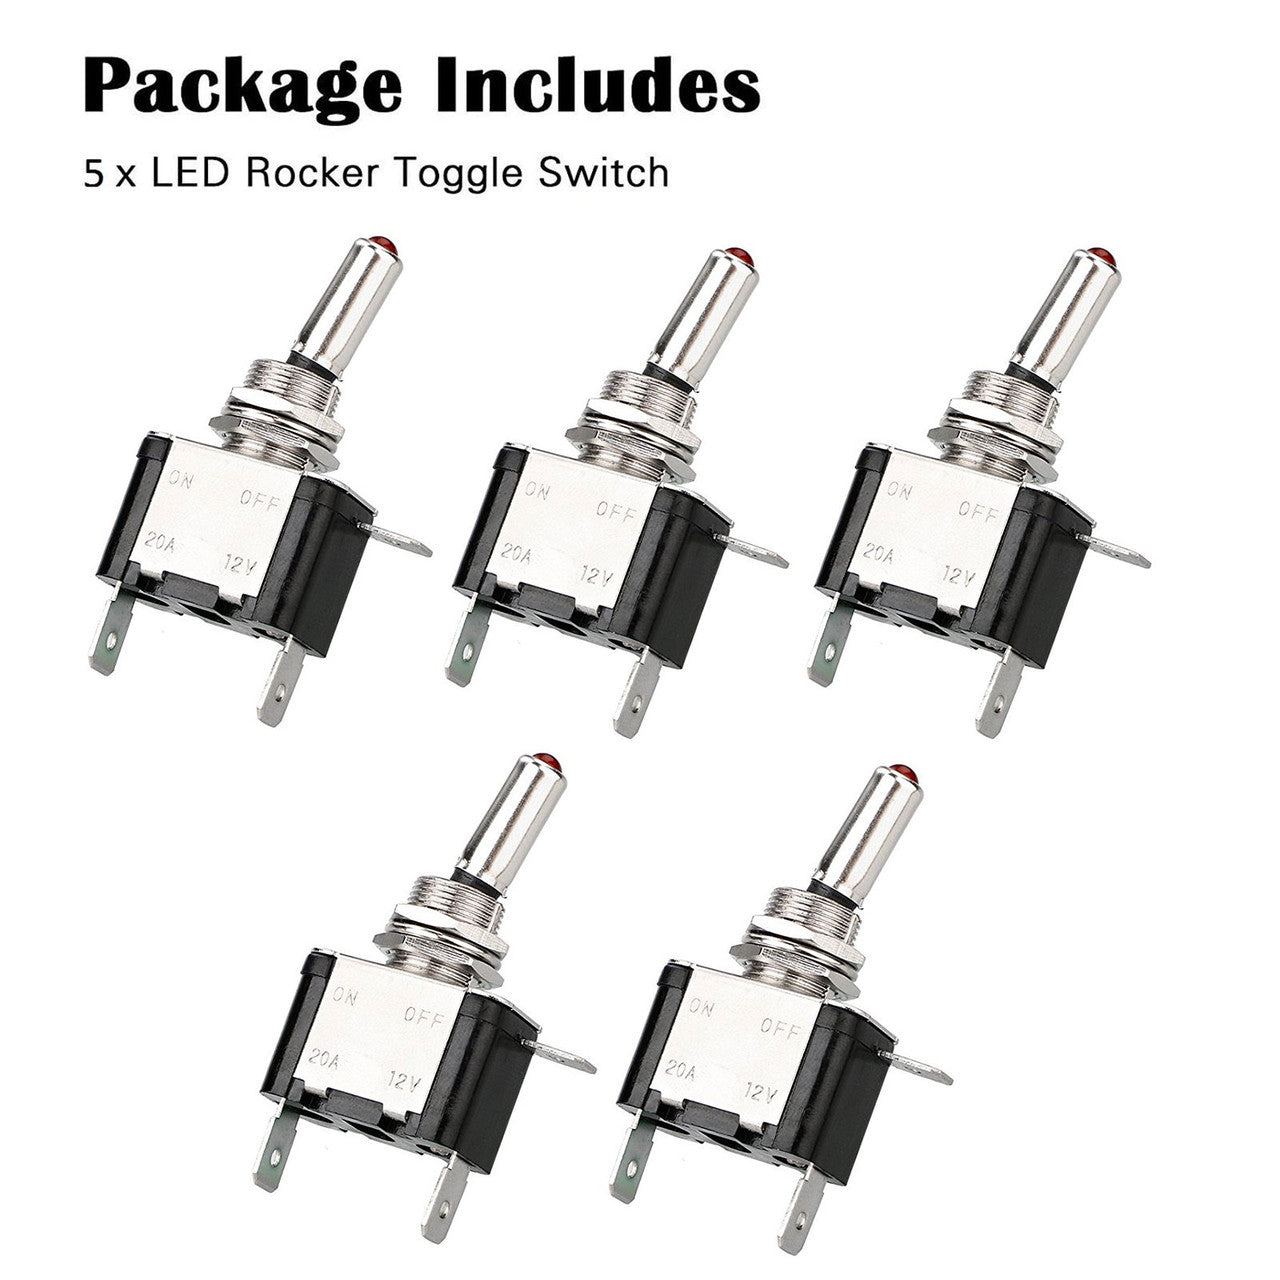 Rocker Toggle Switch, 5PCS Car LED Rocker Toggle Switch Red 12V 20A ON/Off 2Pin Replacement Universal for Cars Trucks Boats UTVs Airplanes and More